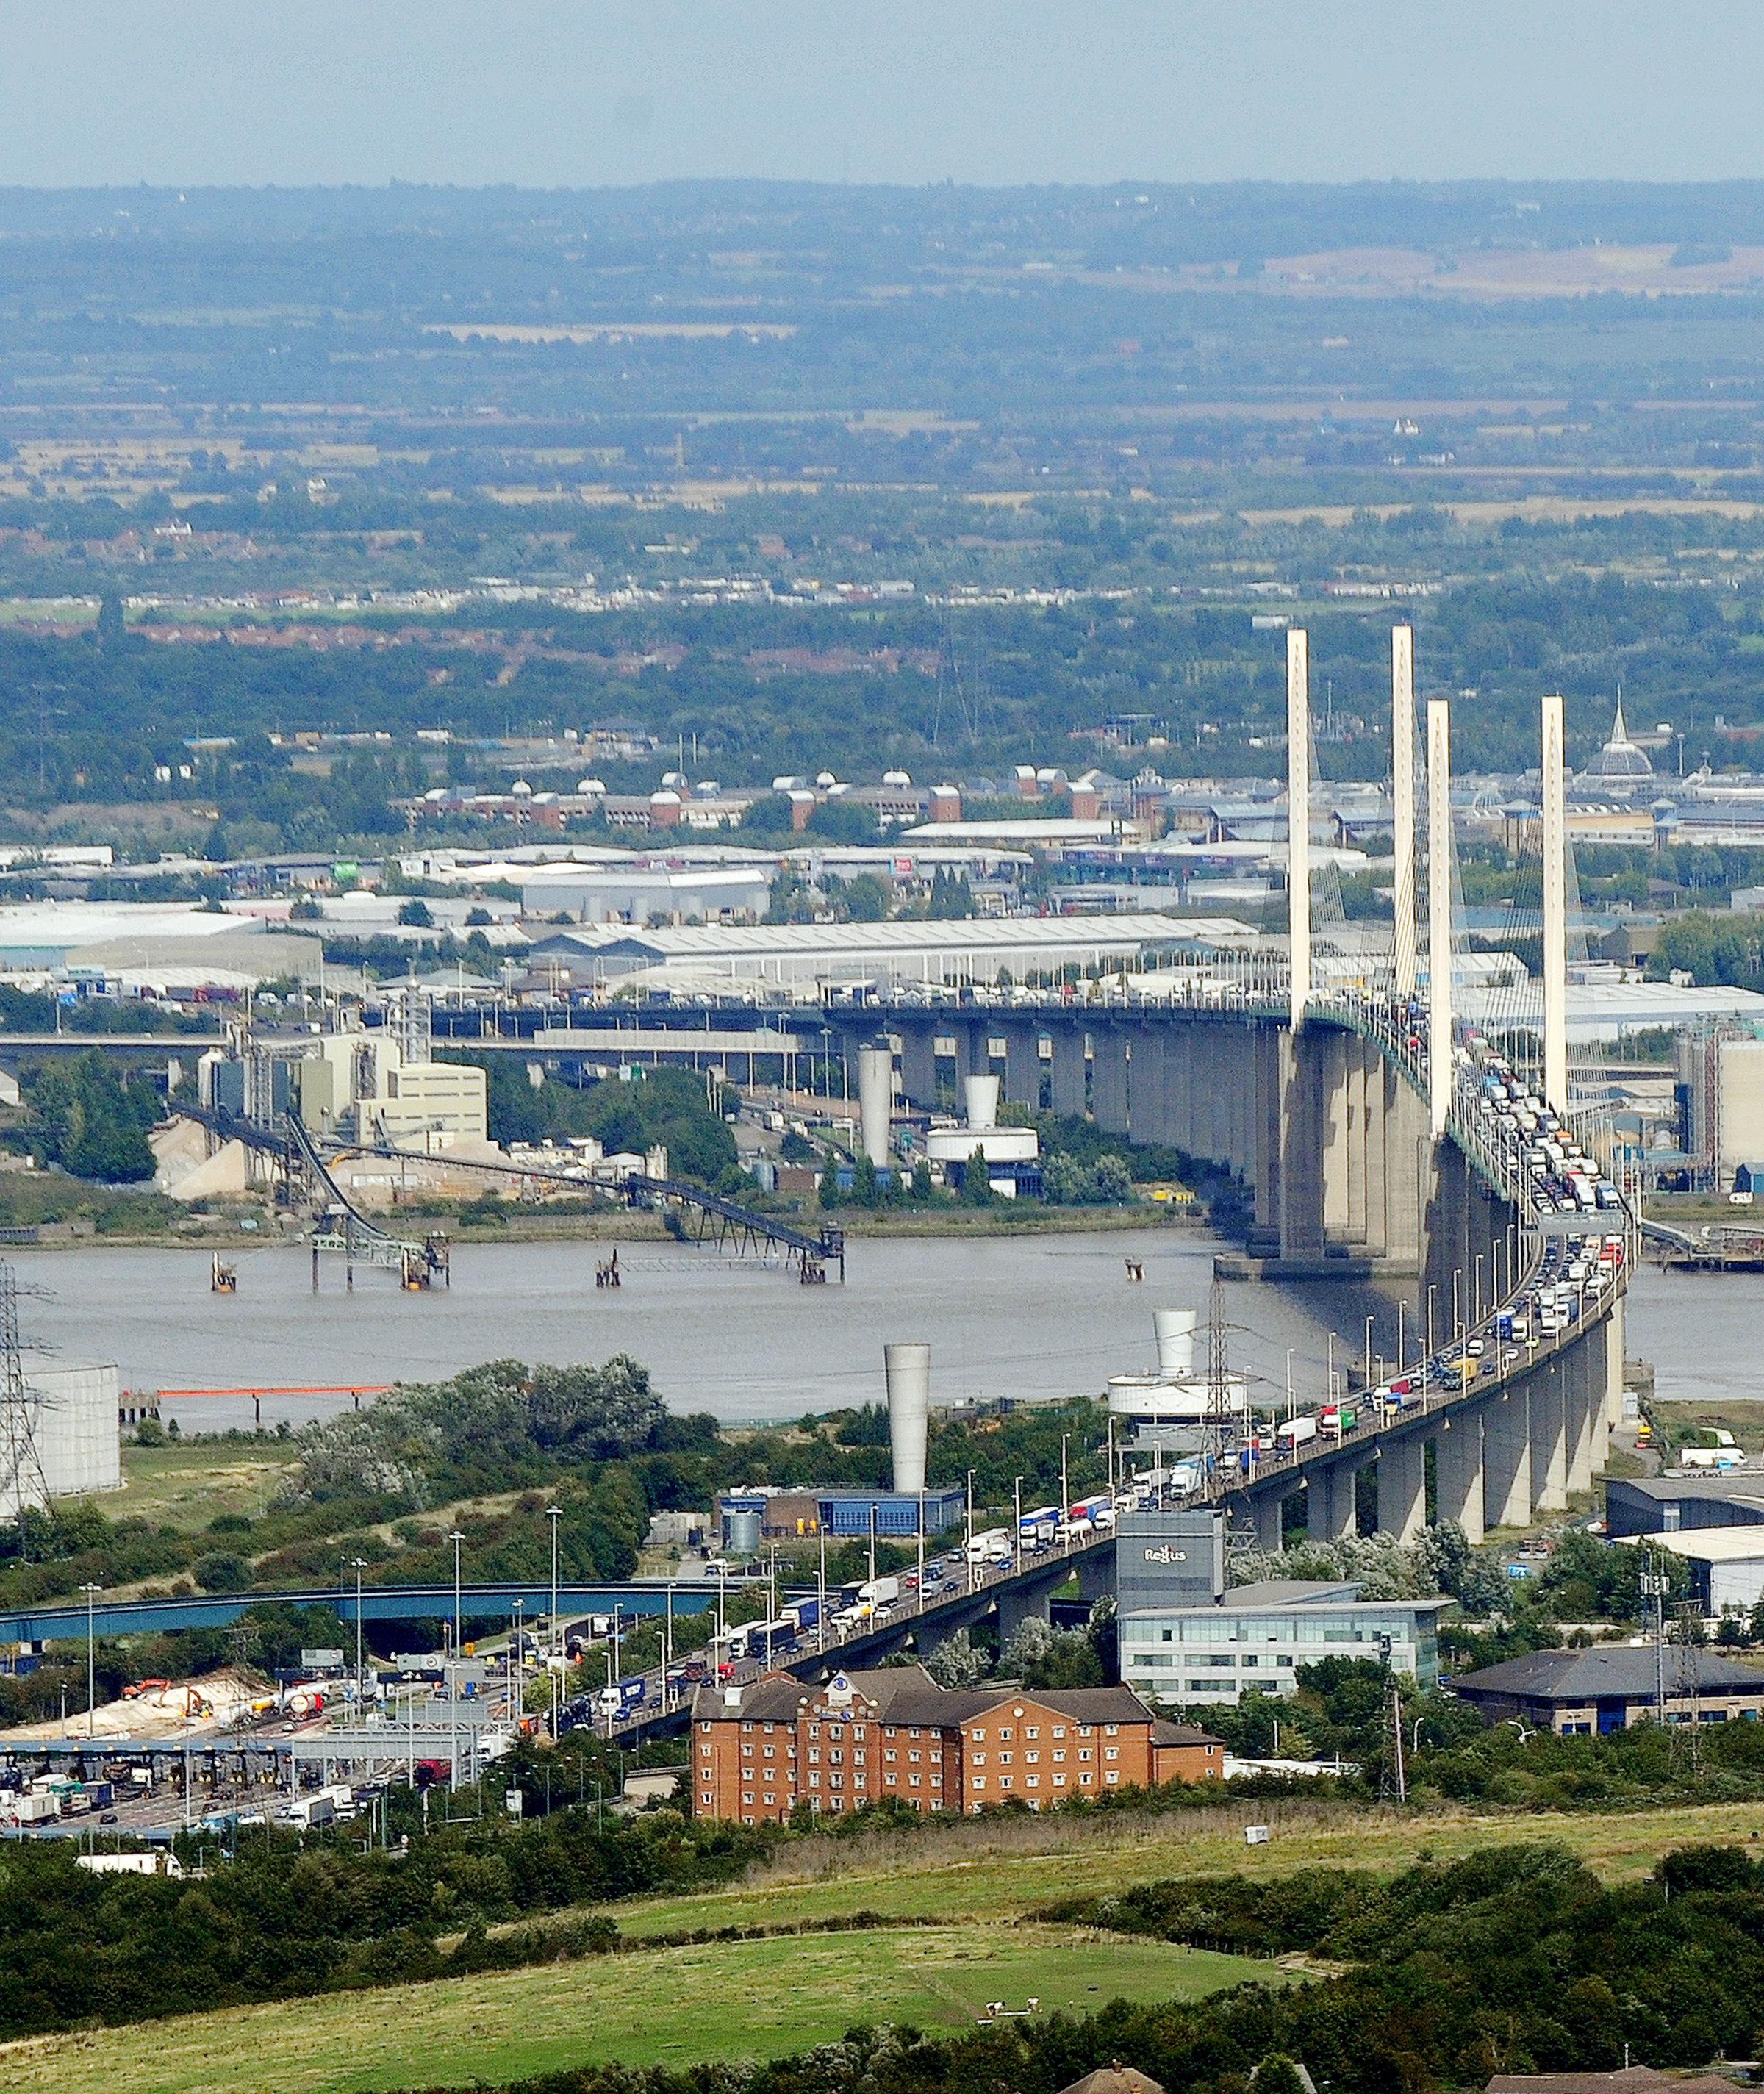 Busy - the bridge is used by countless south Essex residents everyday